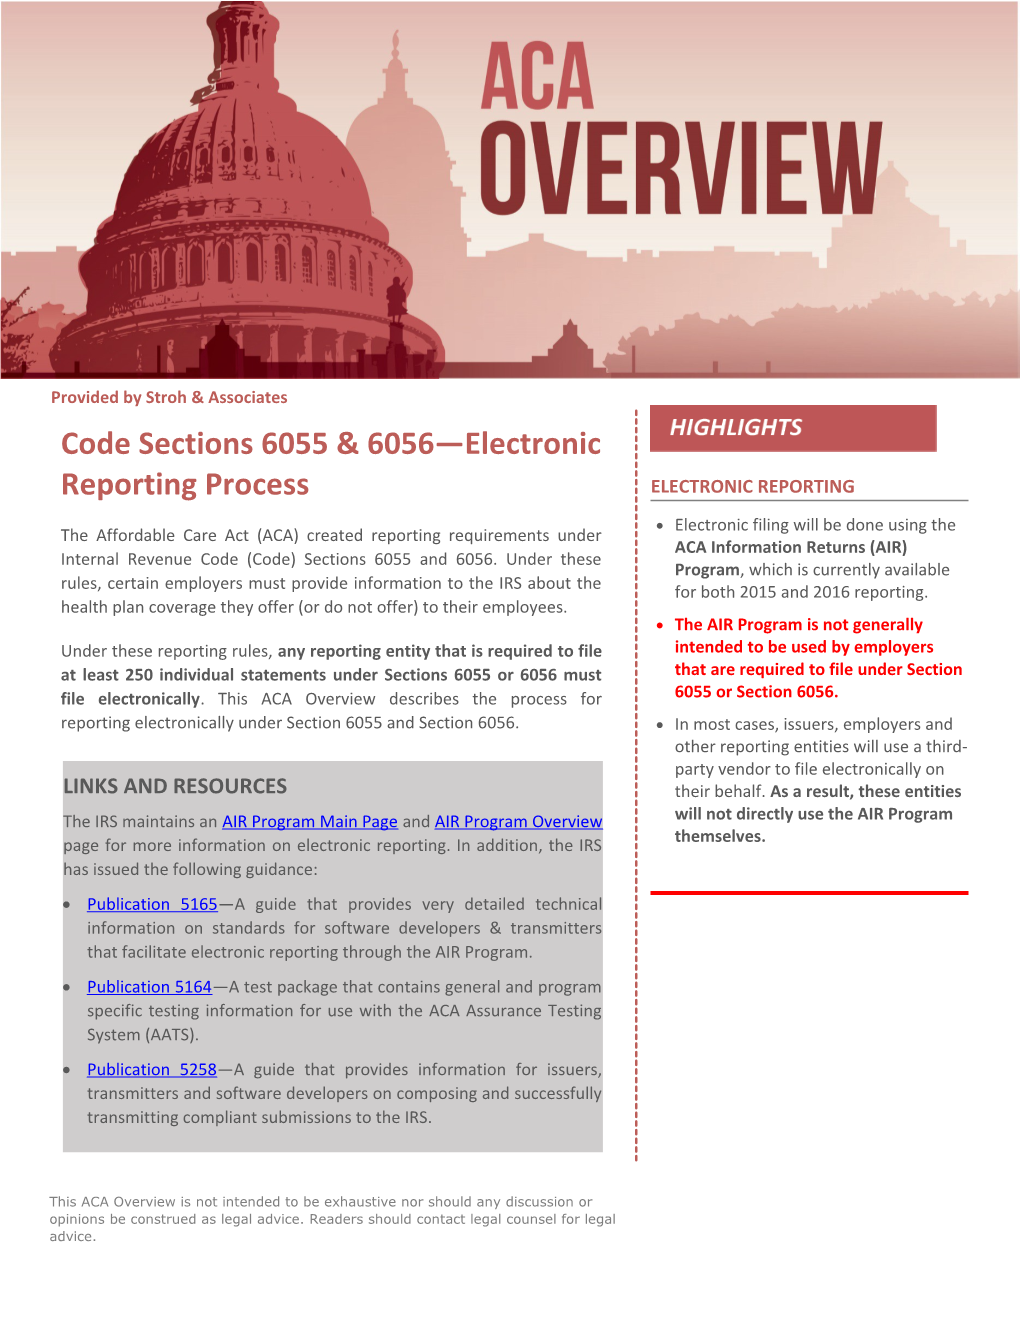 Code Sections 6055 & 6056 Electronic Reporting Process